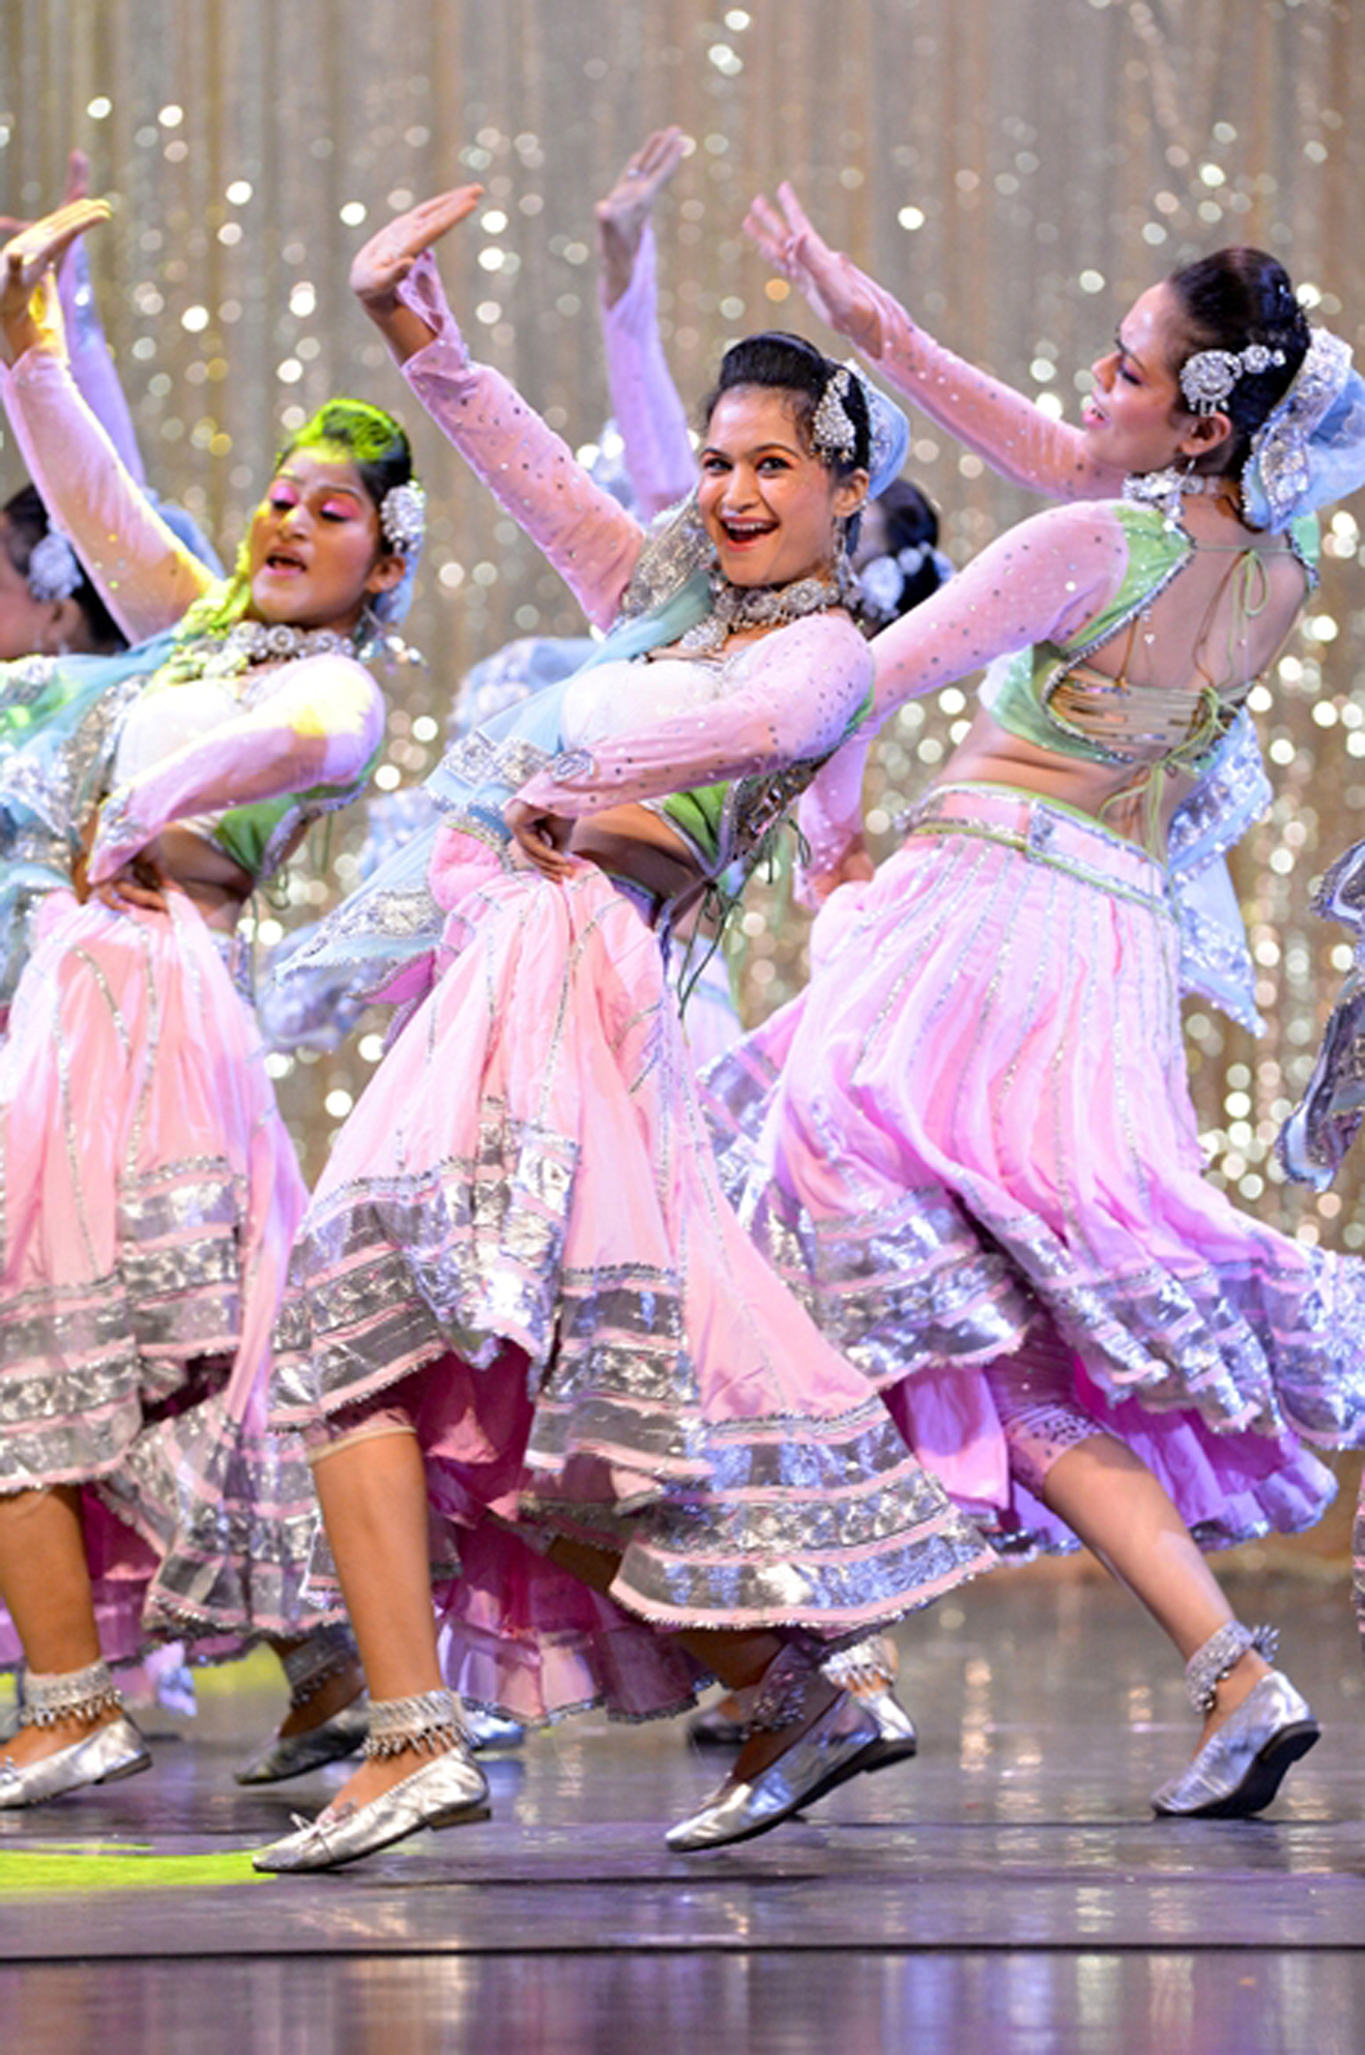 Taj Express-The Bollywood Musical Revue at SMDCAC on Sun., March 5 at 4 PM